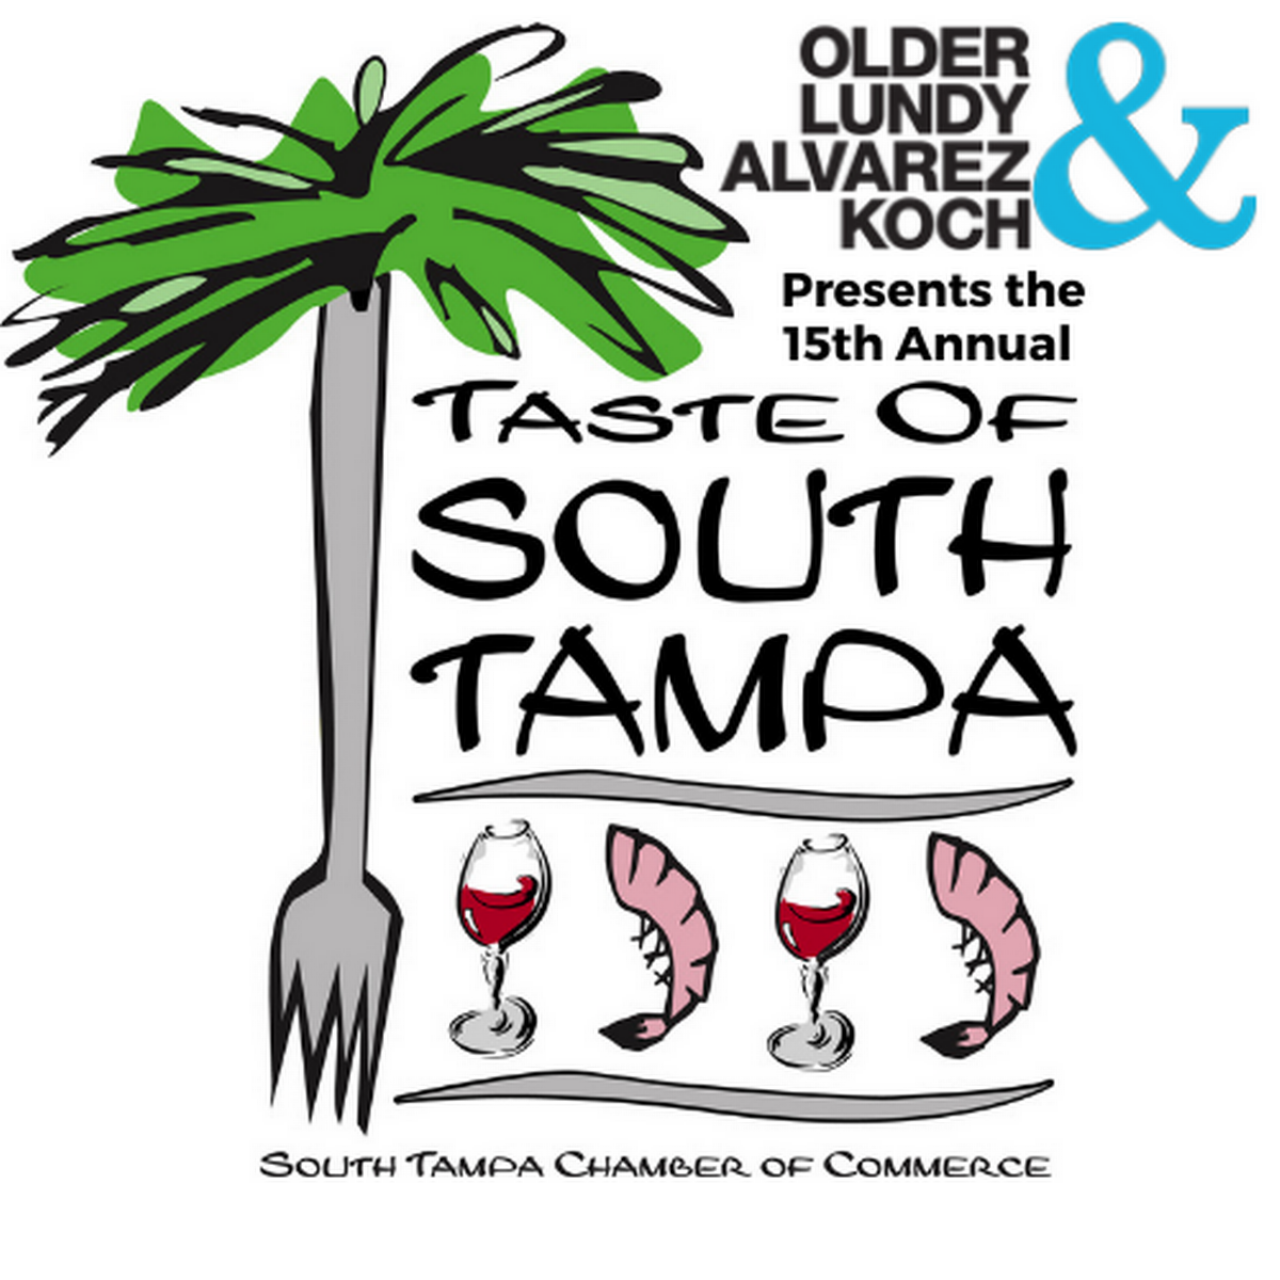 Older Lundy & Alvarez Koch Presents the 15th Annual Taste of South Tampa at Hotel Haya